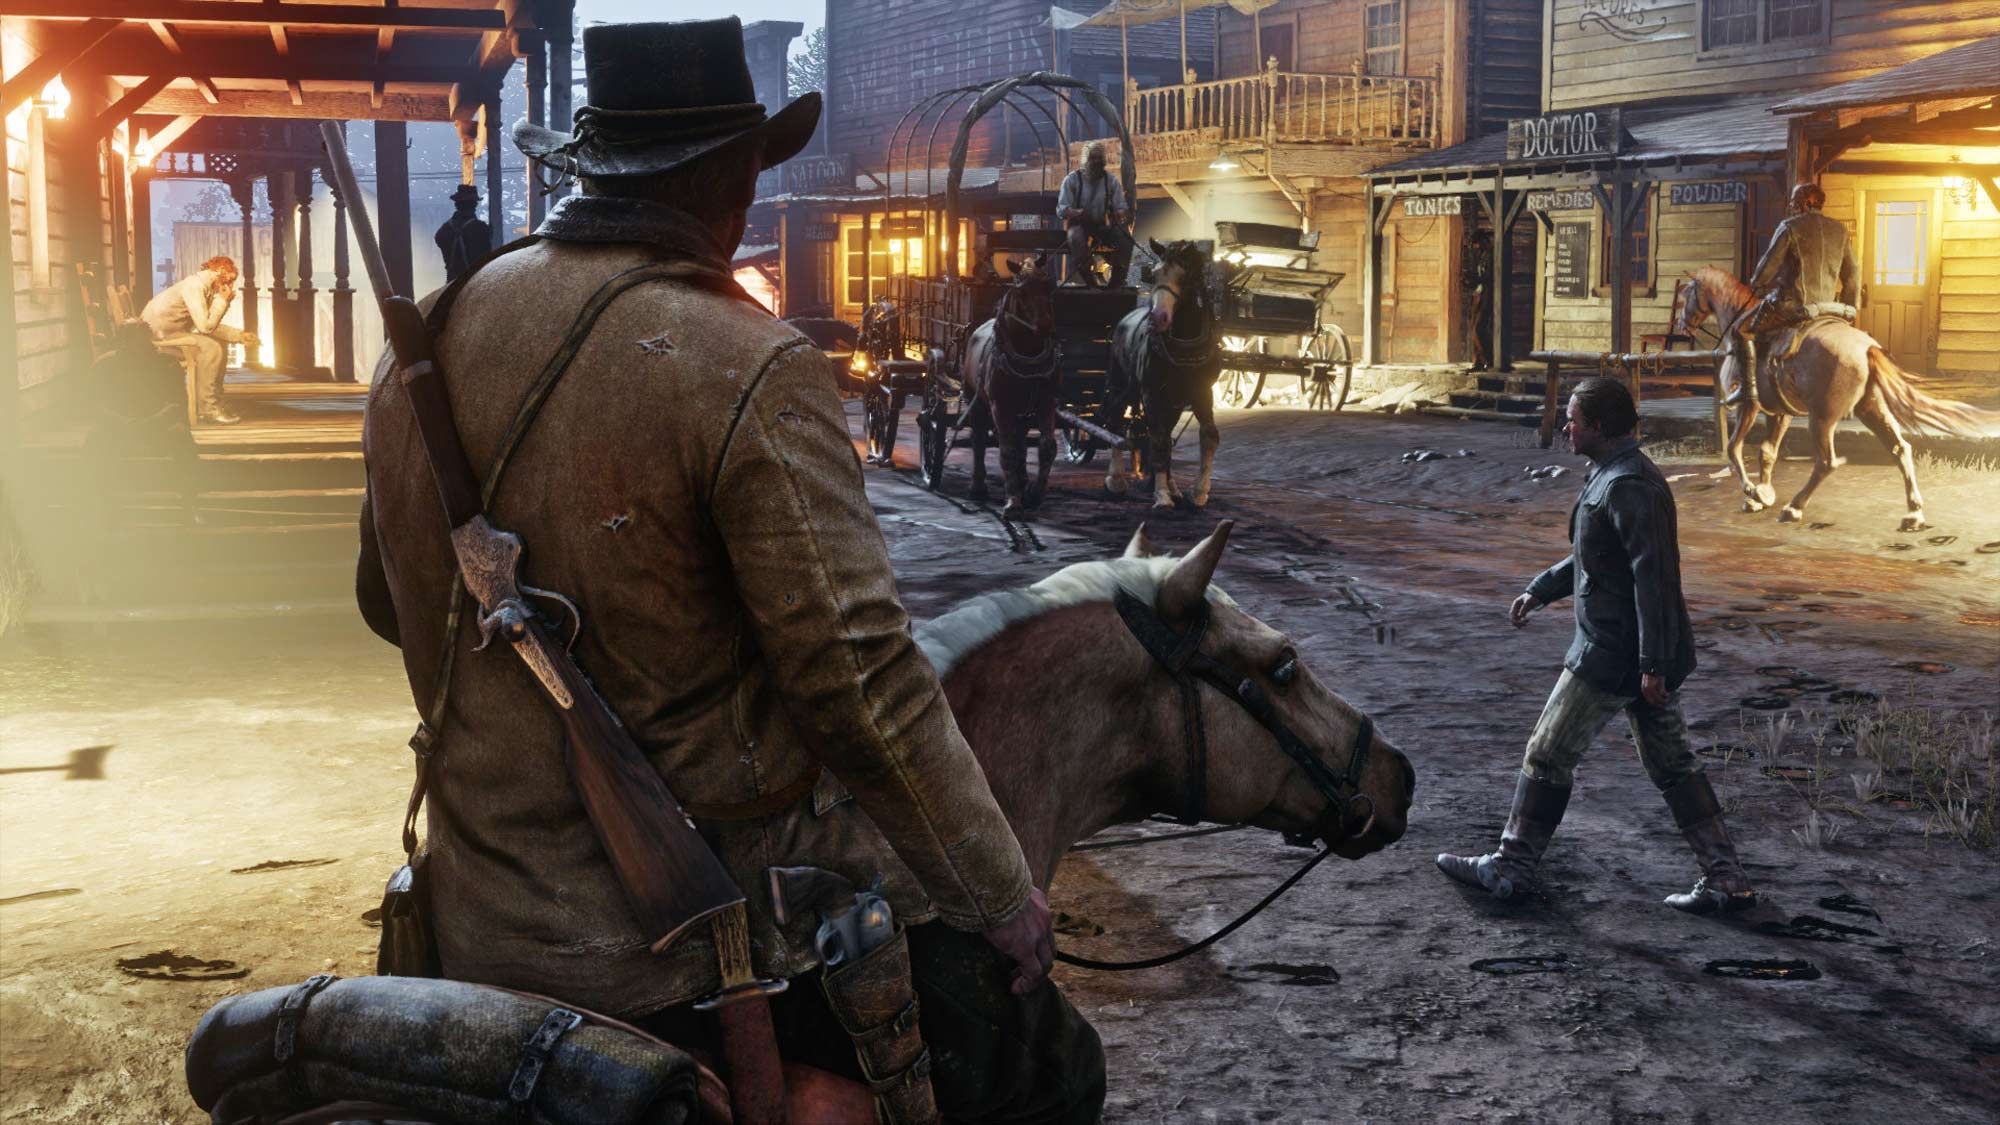 Red Dead Redemption 2 release date, trailers and everything you need to know